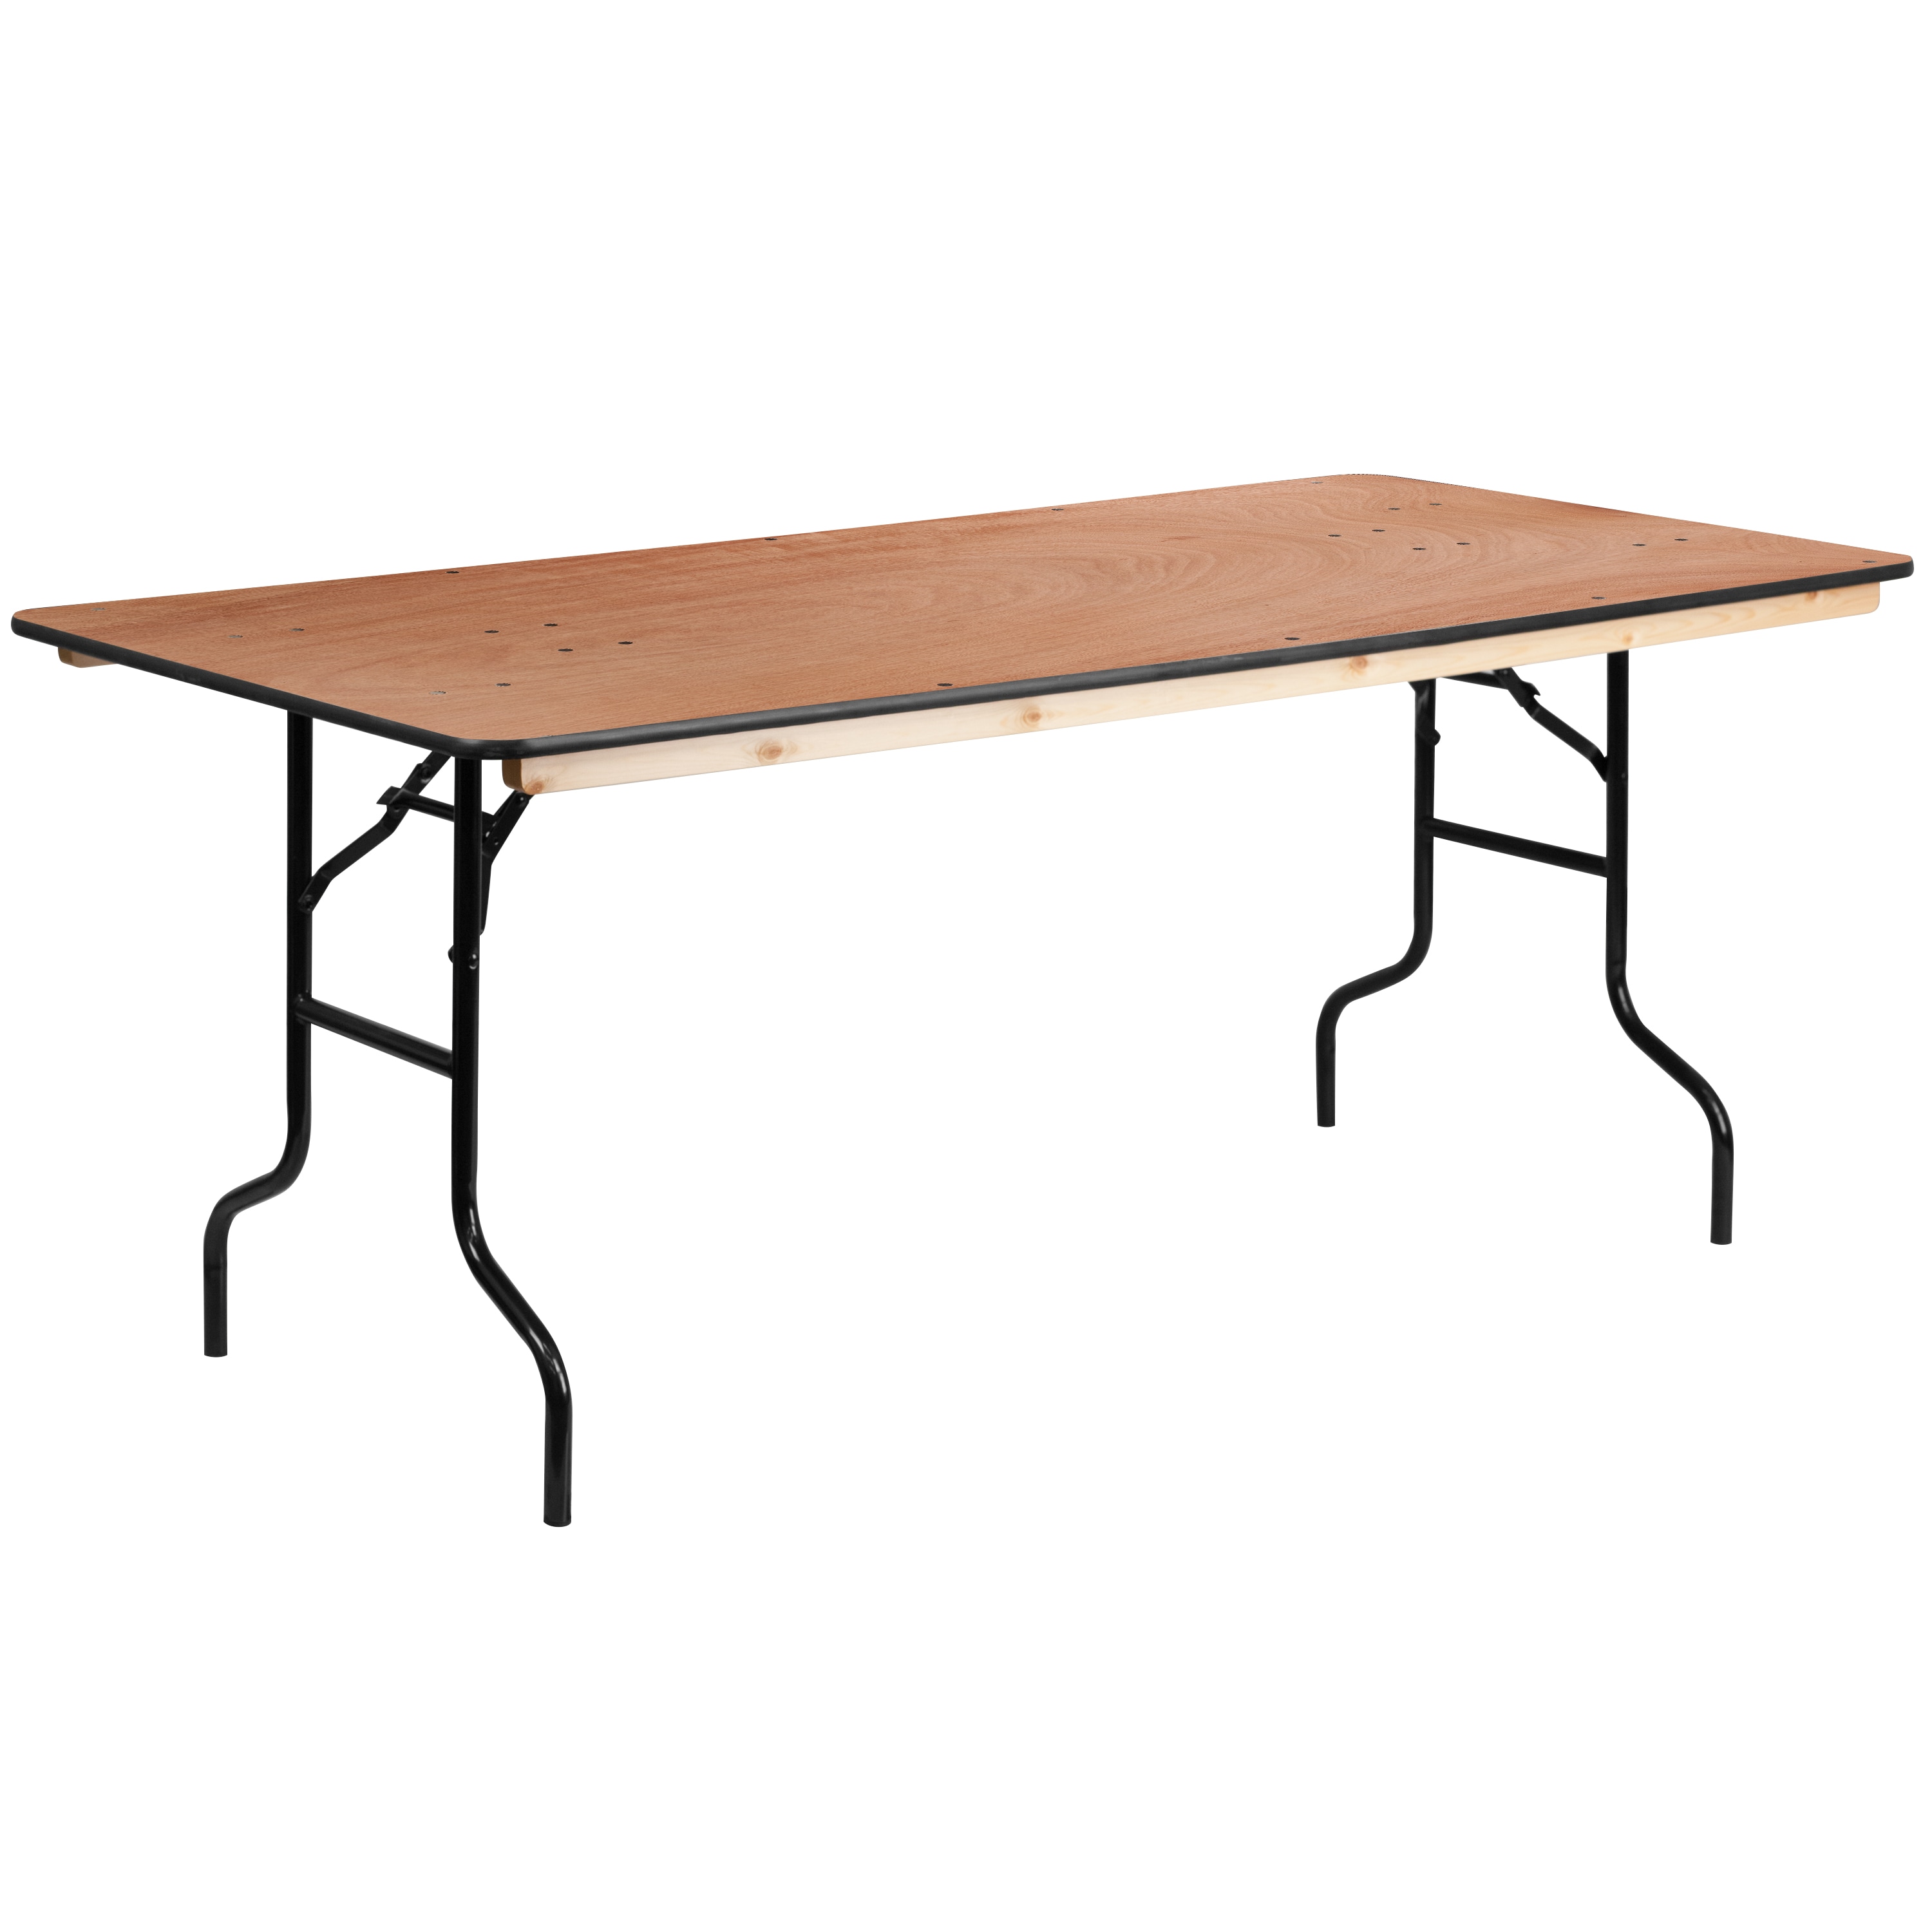 Rolling Foldable Dining Table Craft Table Workstation - Brown